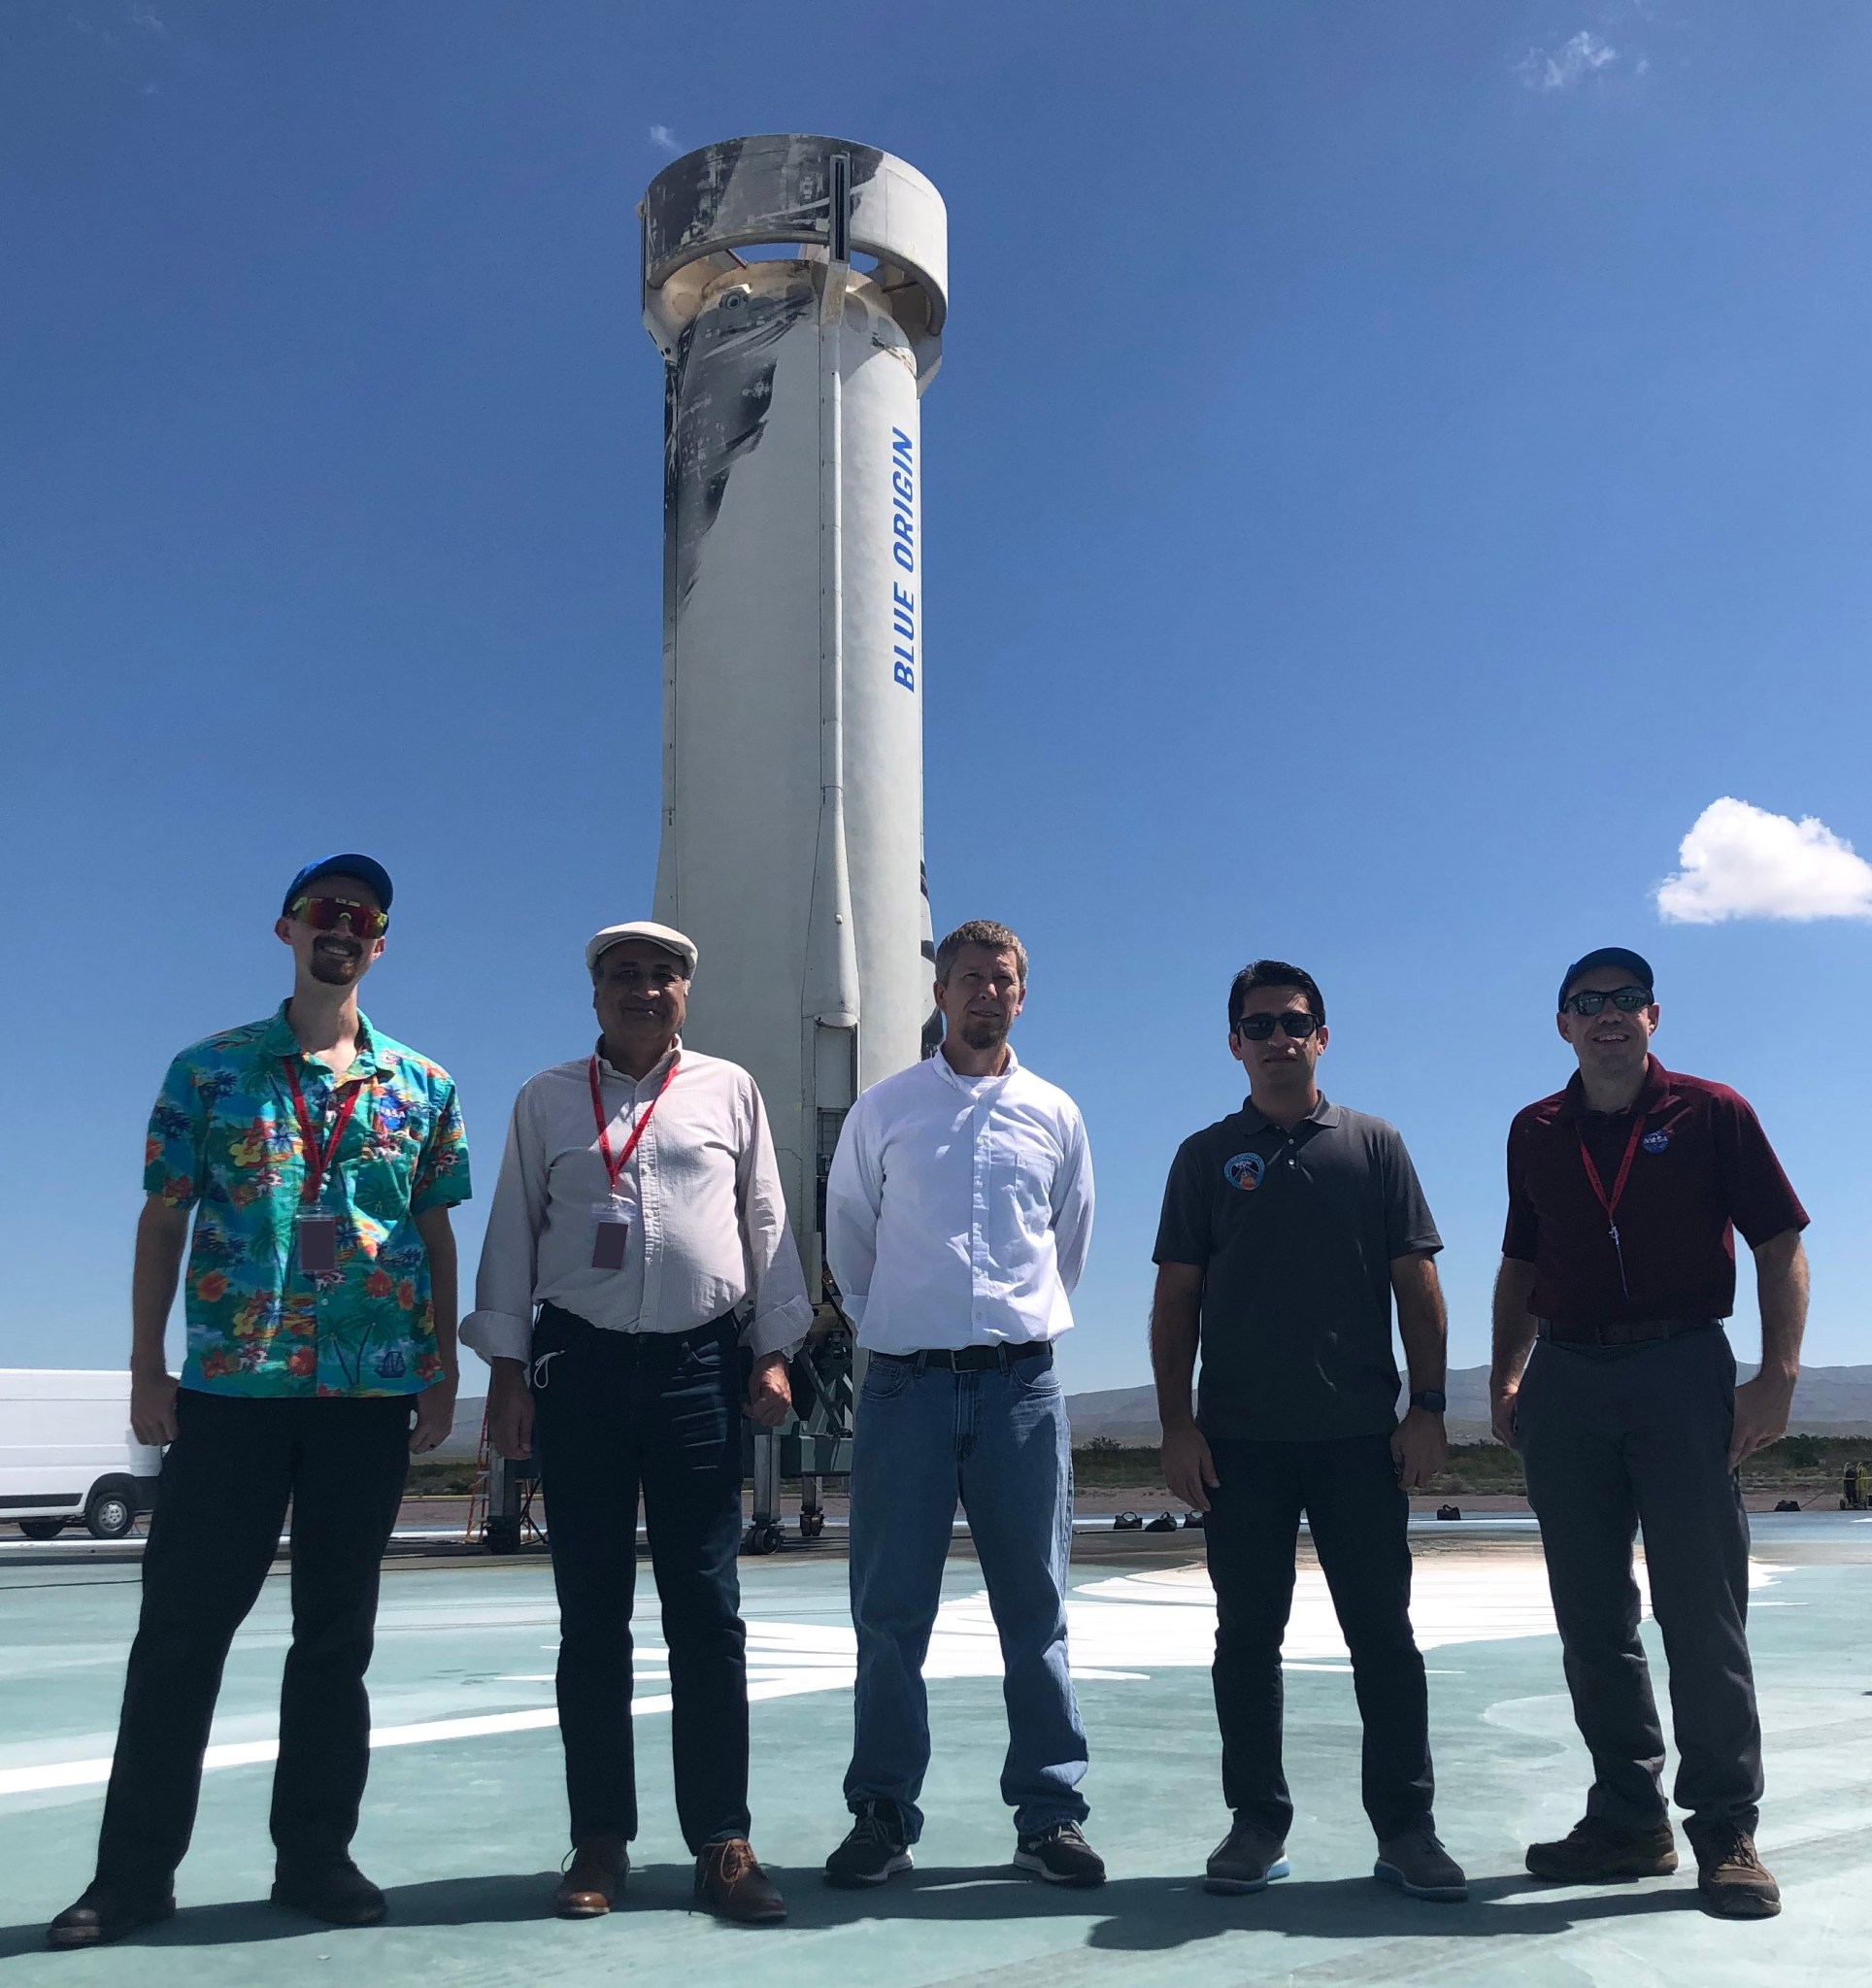 Team in front of a rocket booster.